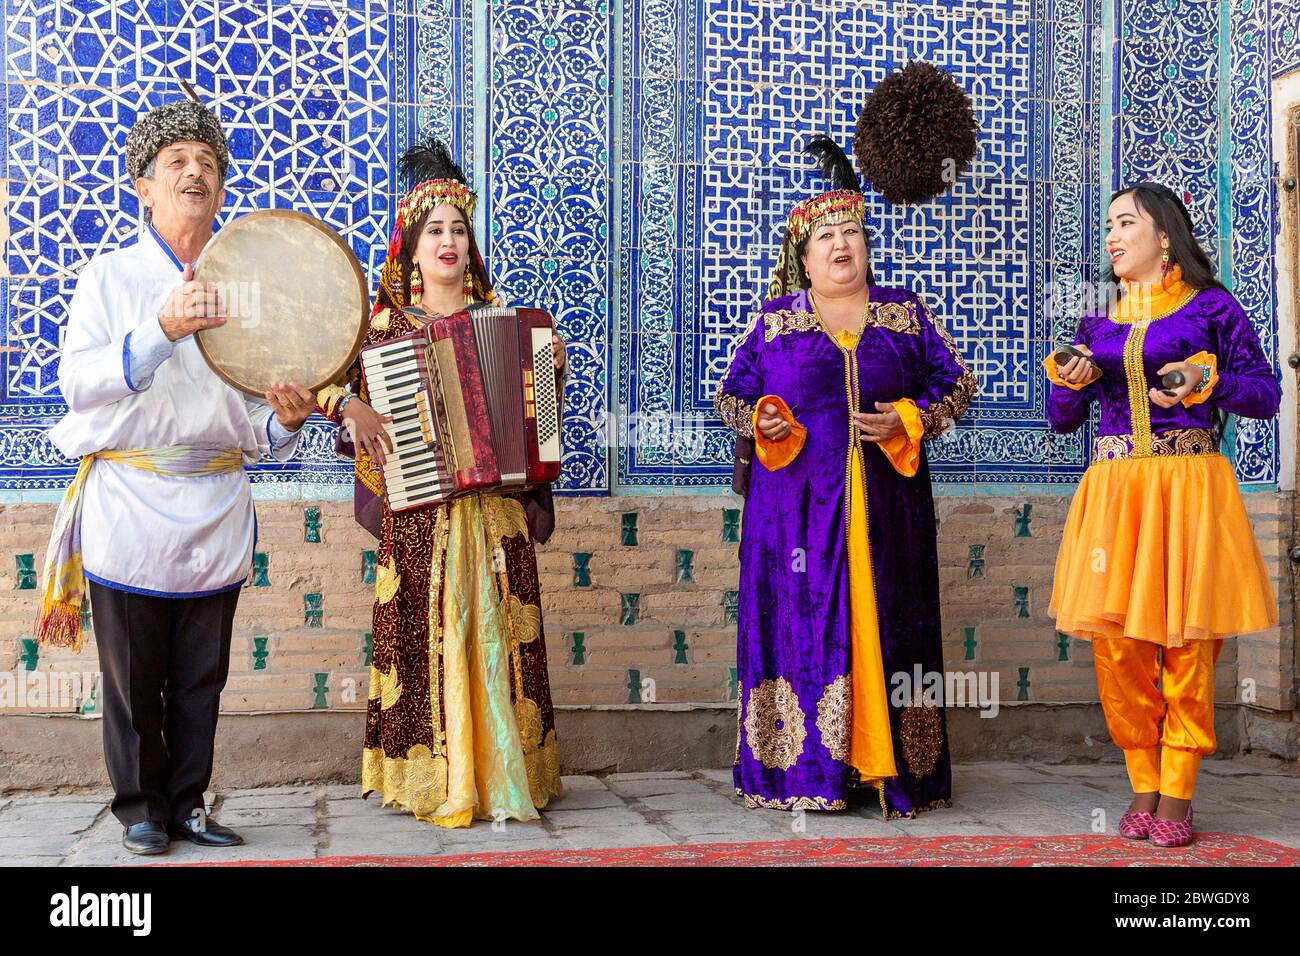 Uzbek musicians in traditional clothes playing musical instruments and singing local songs, in Khiva, Uzbekistan Stock Photo